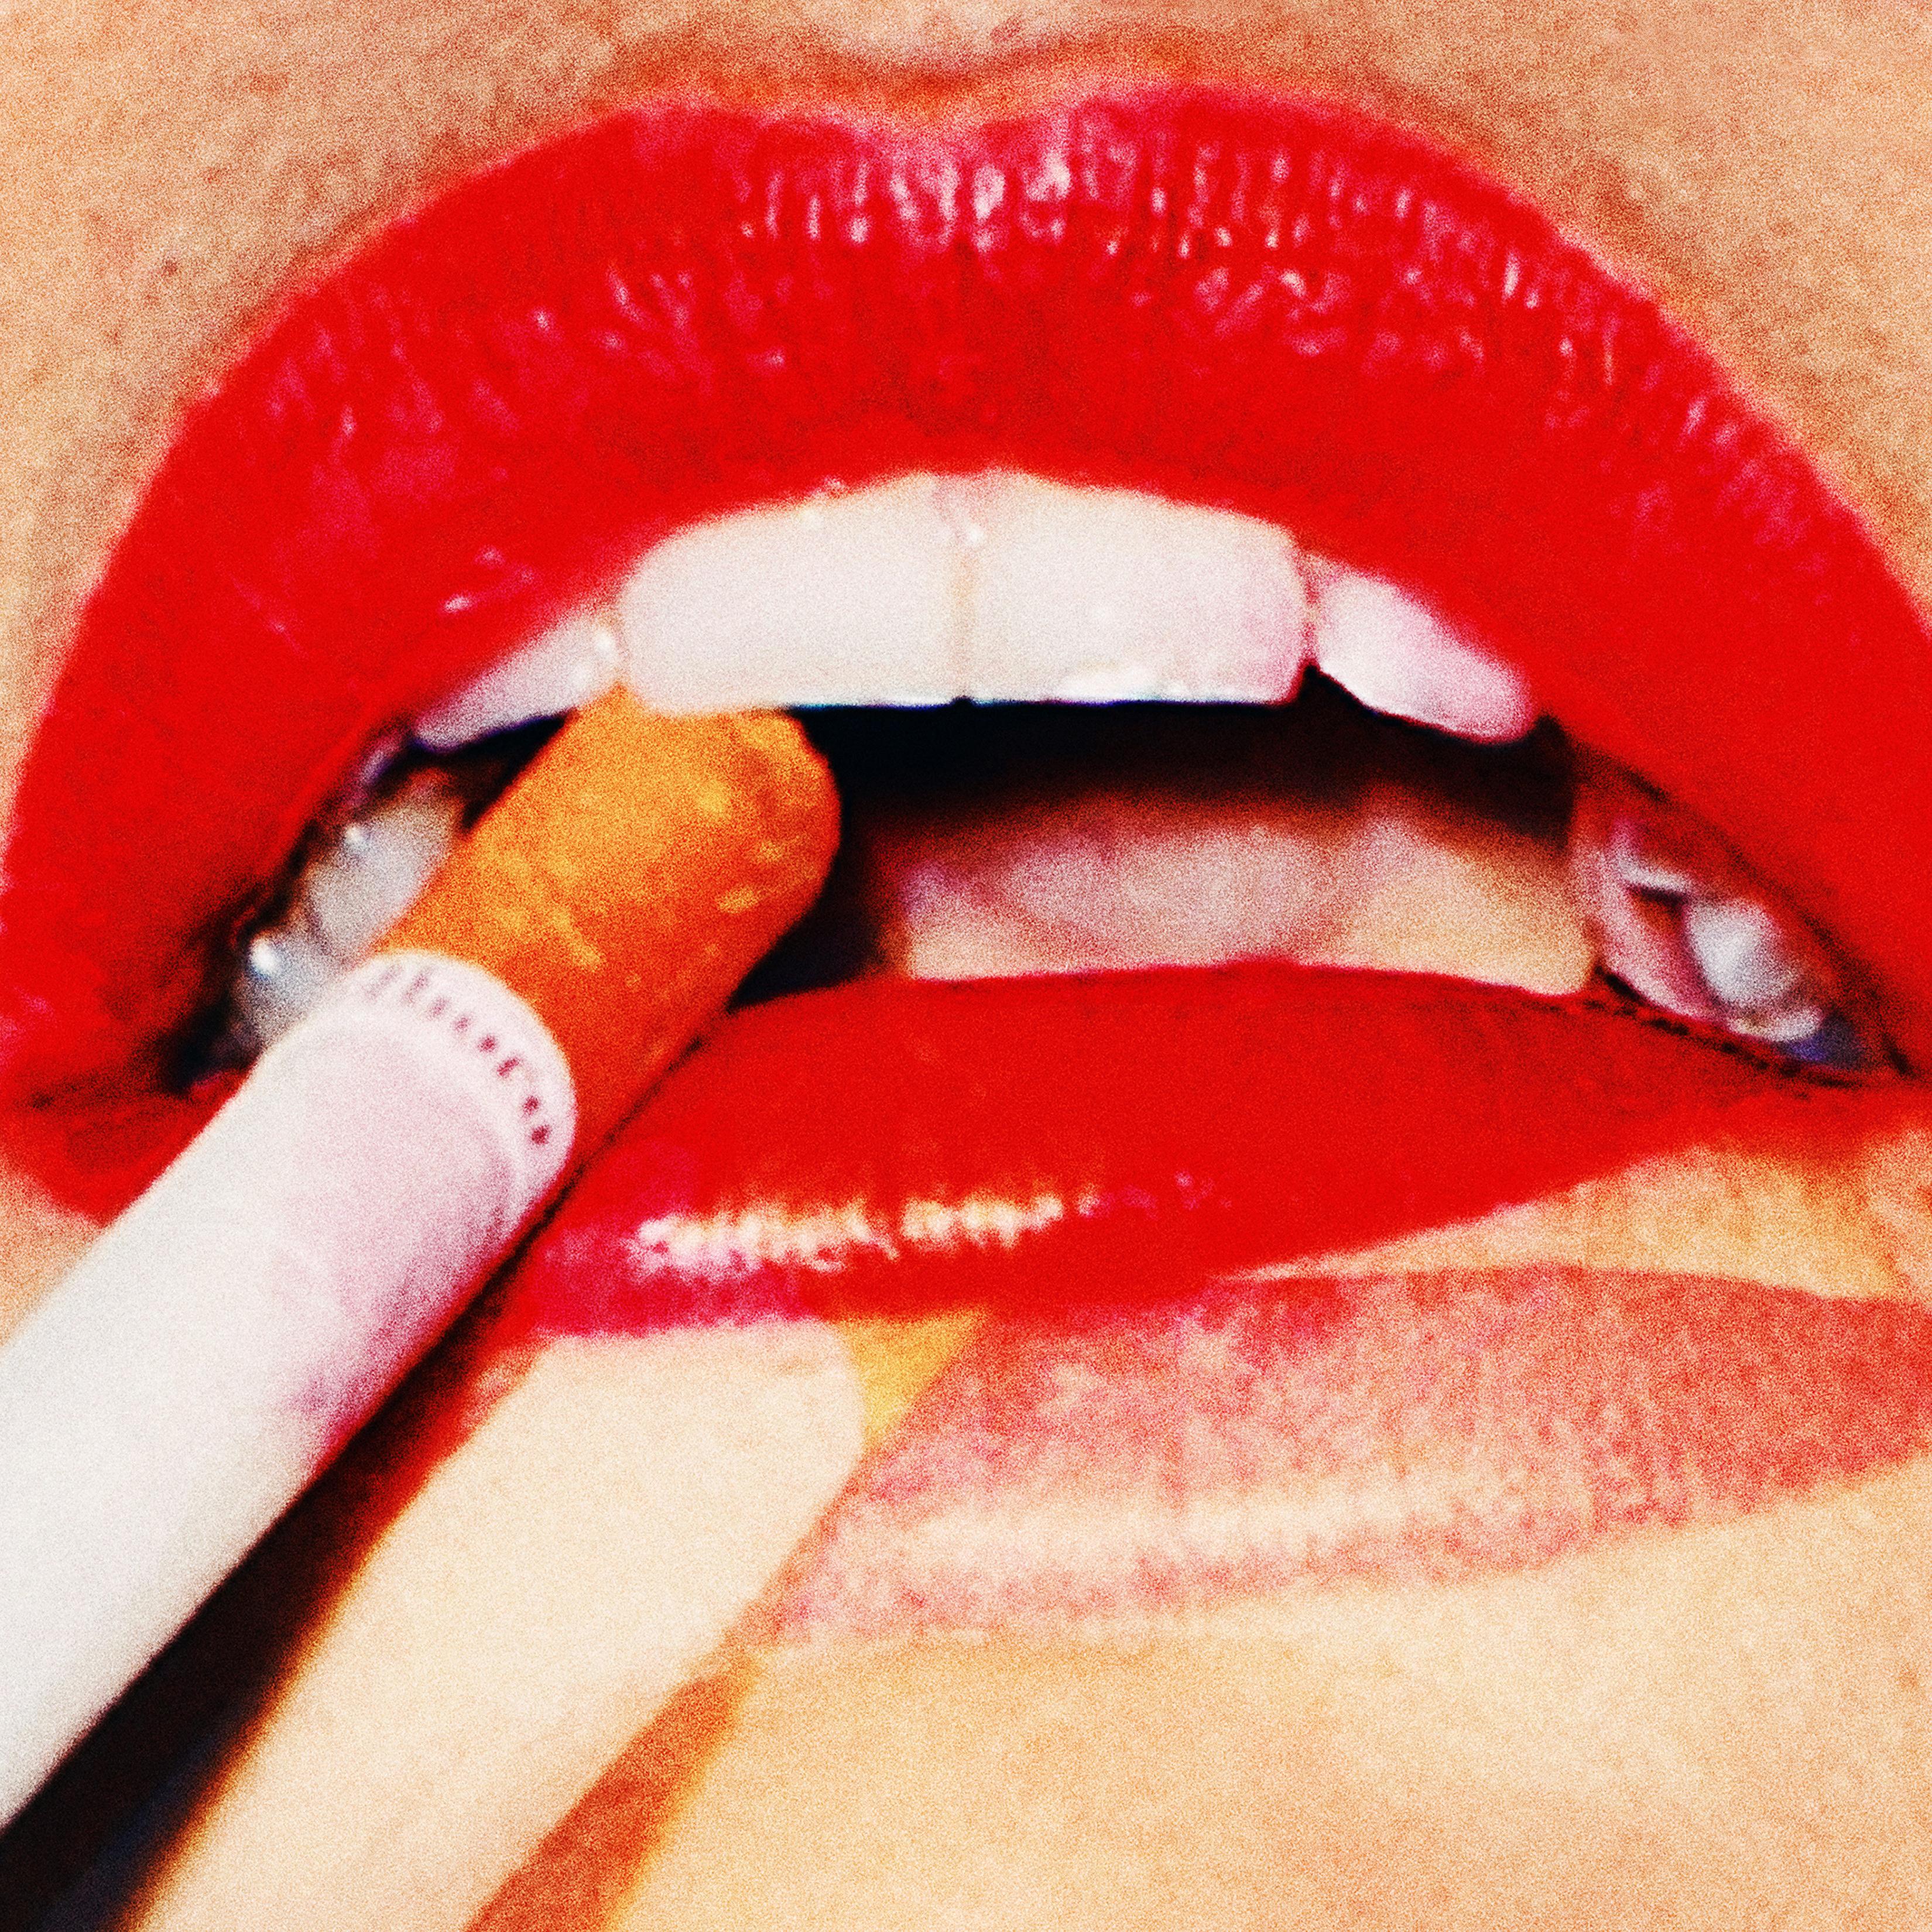 "The Lips" Photography 32" x 32"  Edition of 7 by Larsen Sotelo